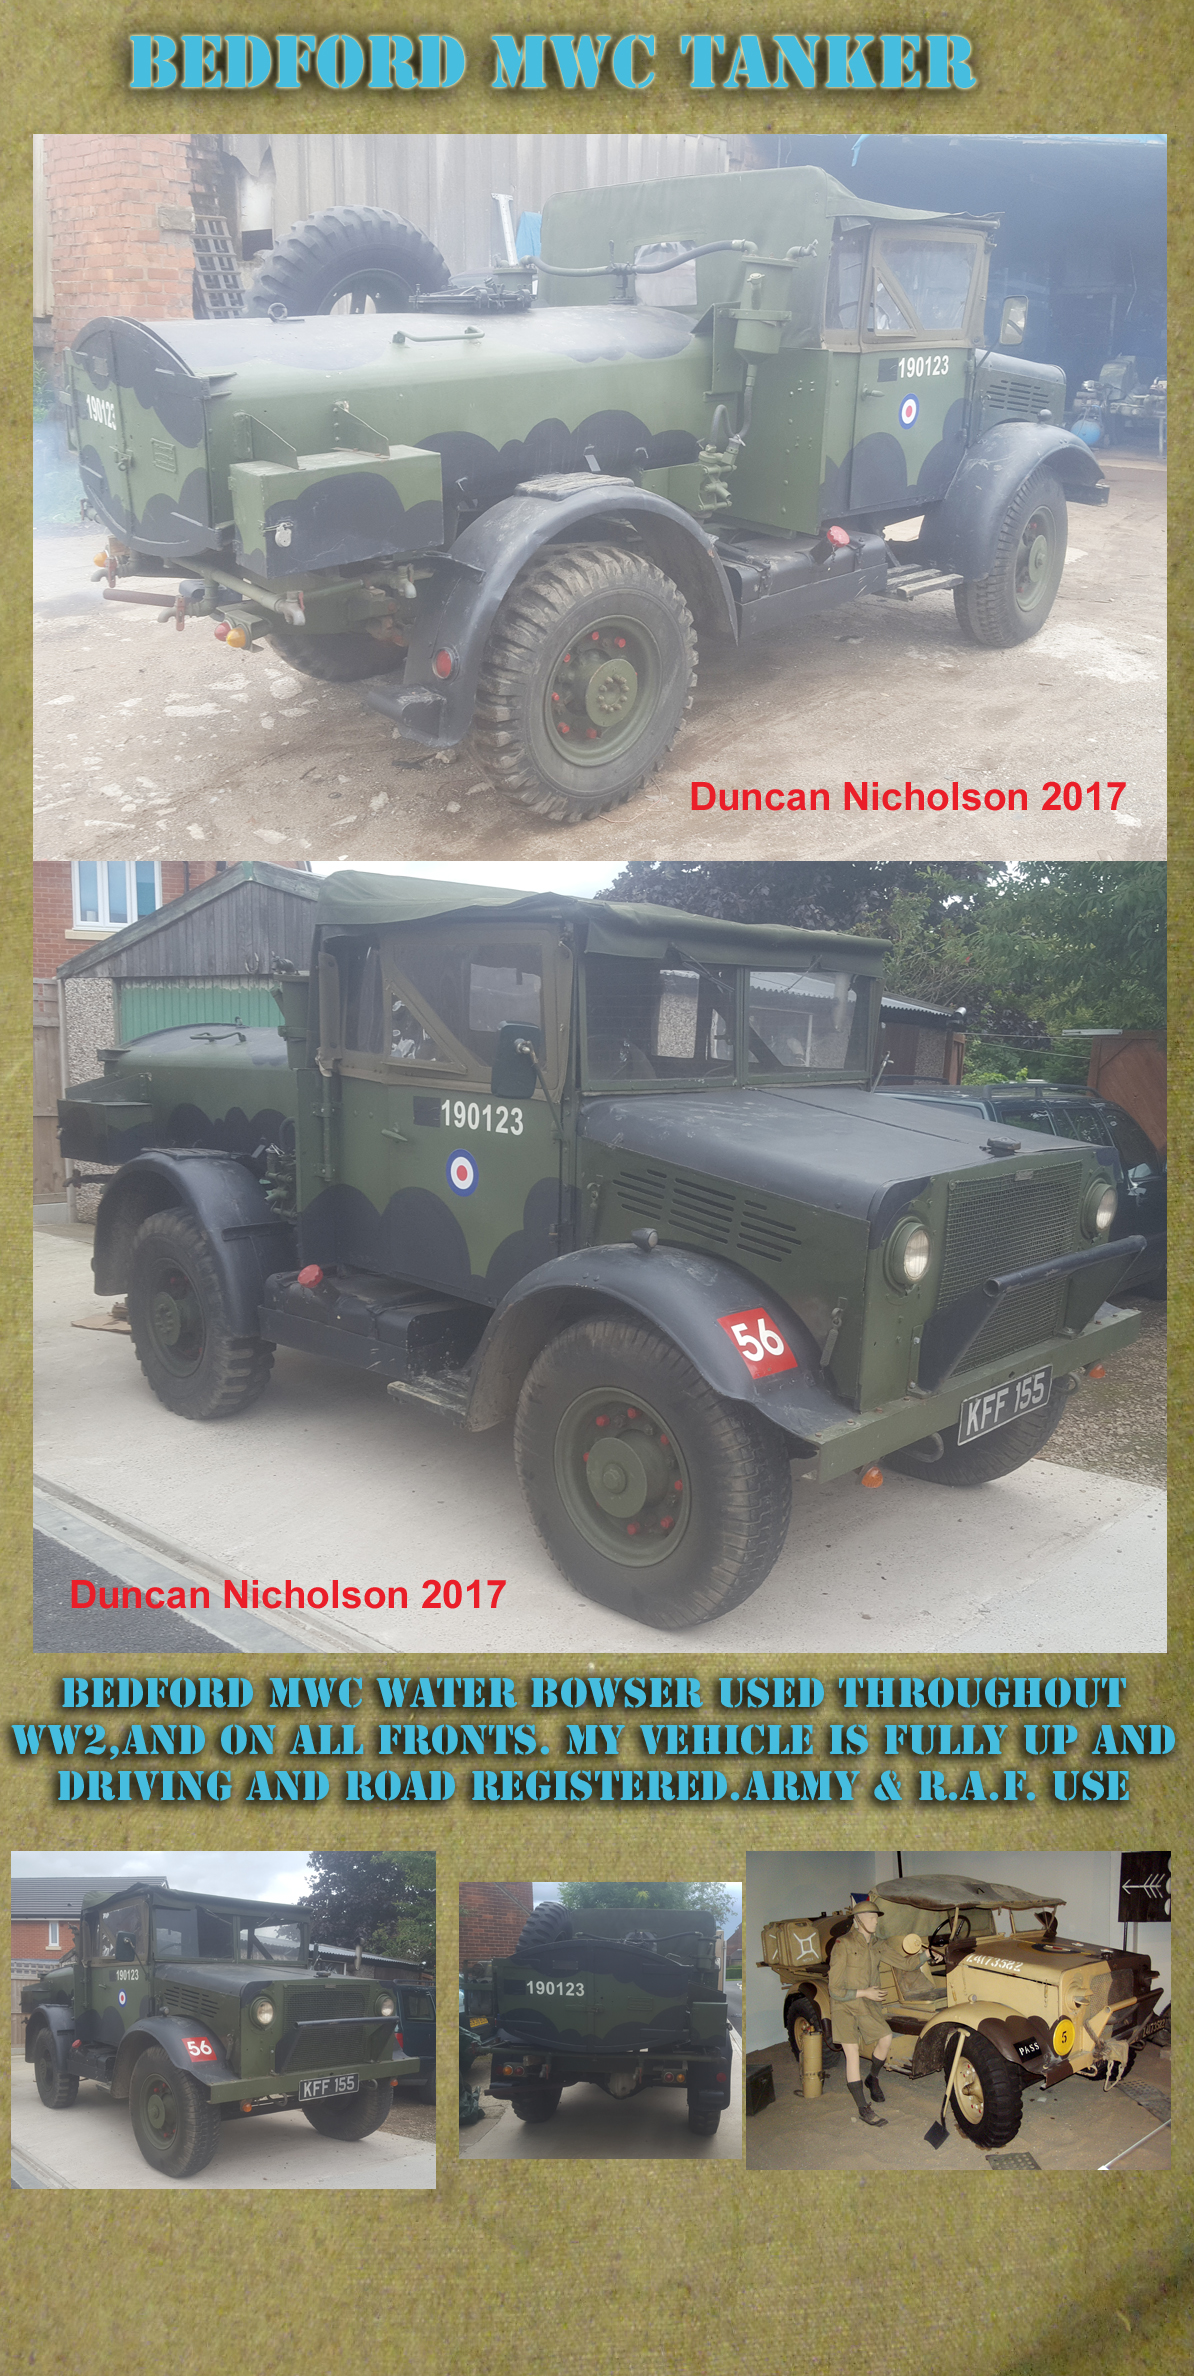 Wartime Bedford MWC British Army truck for hire